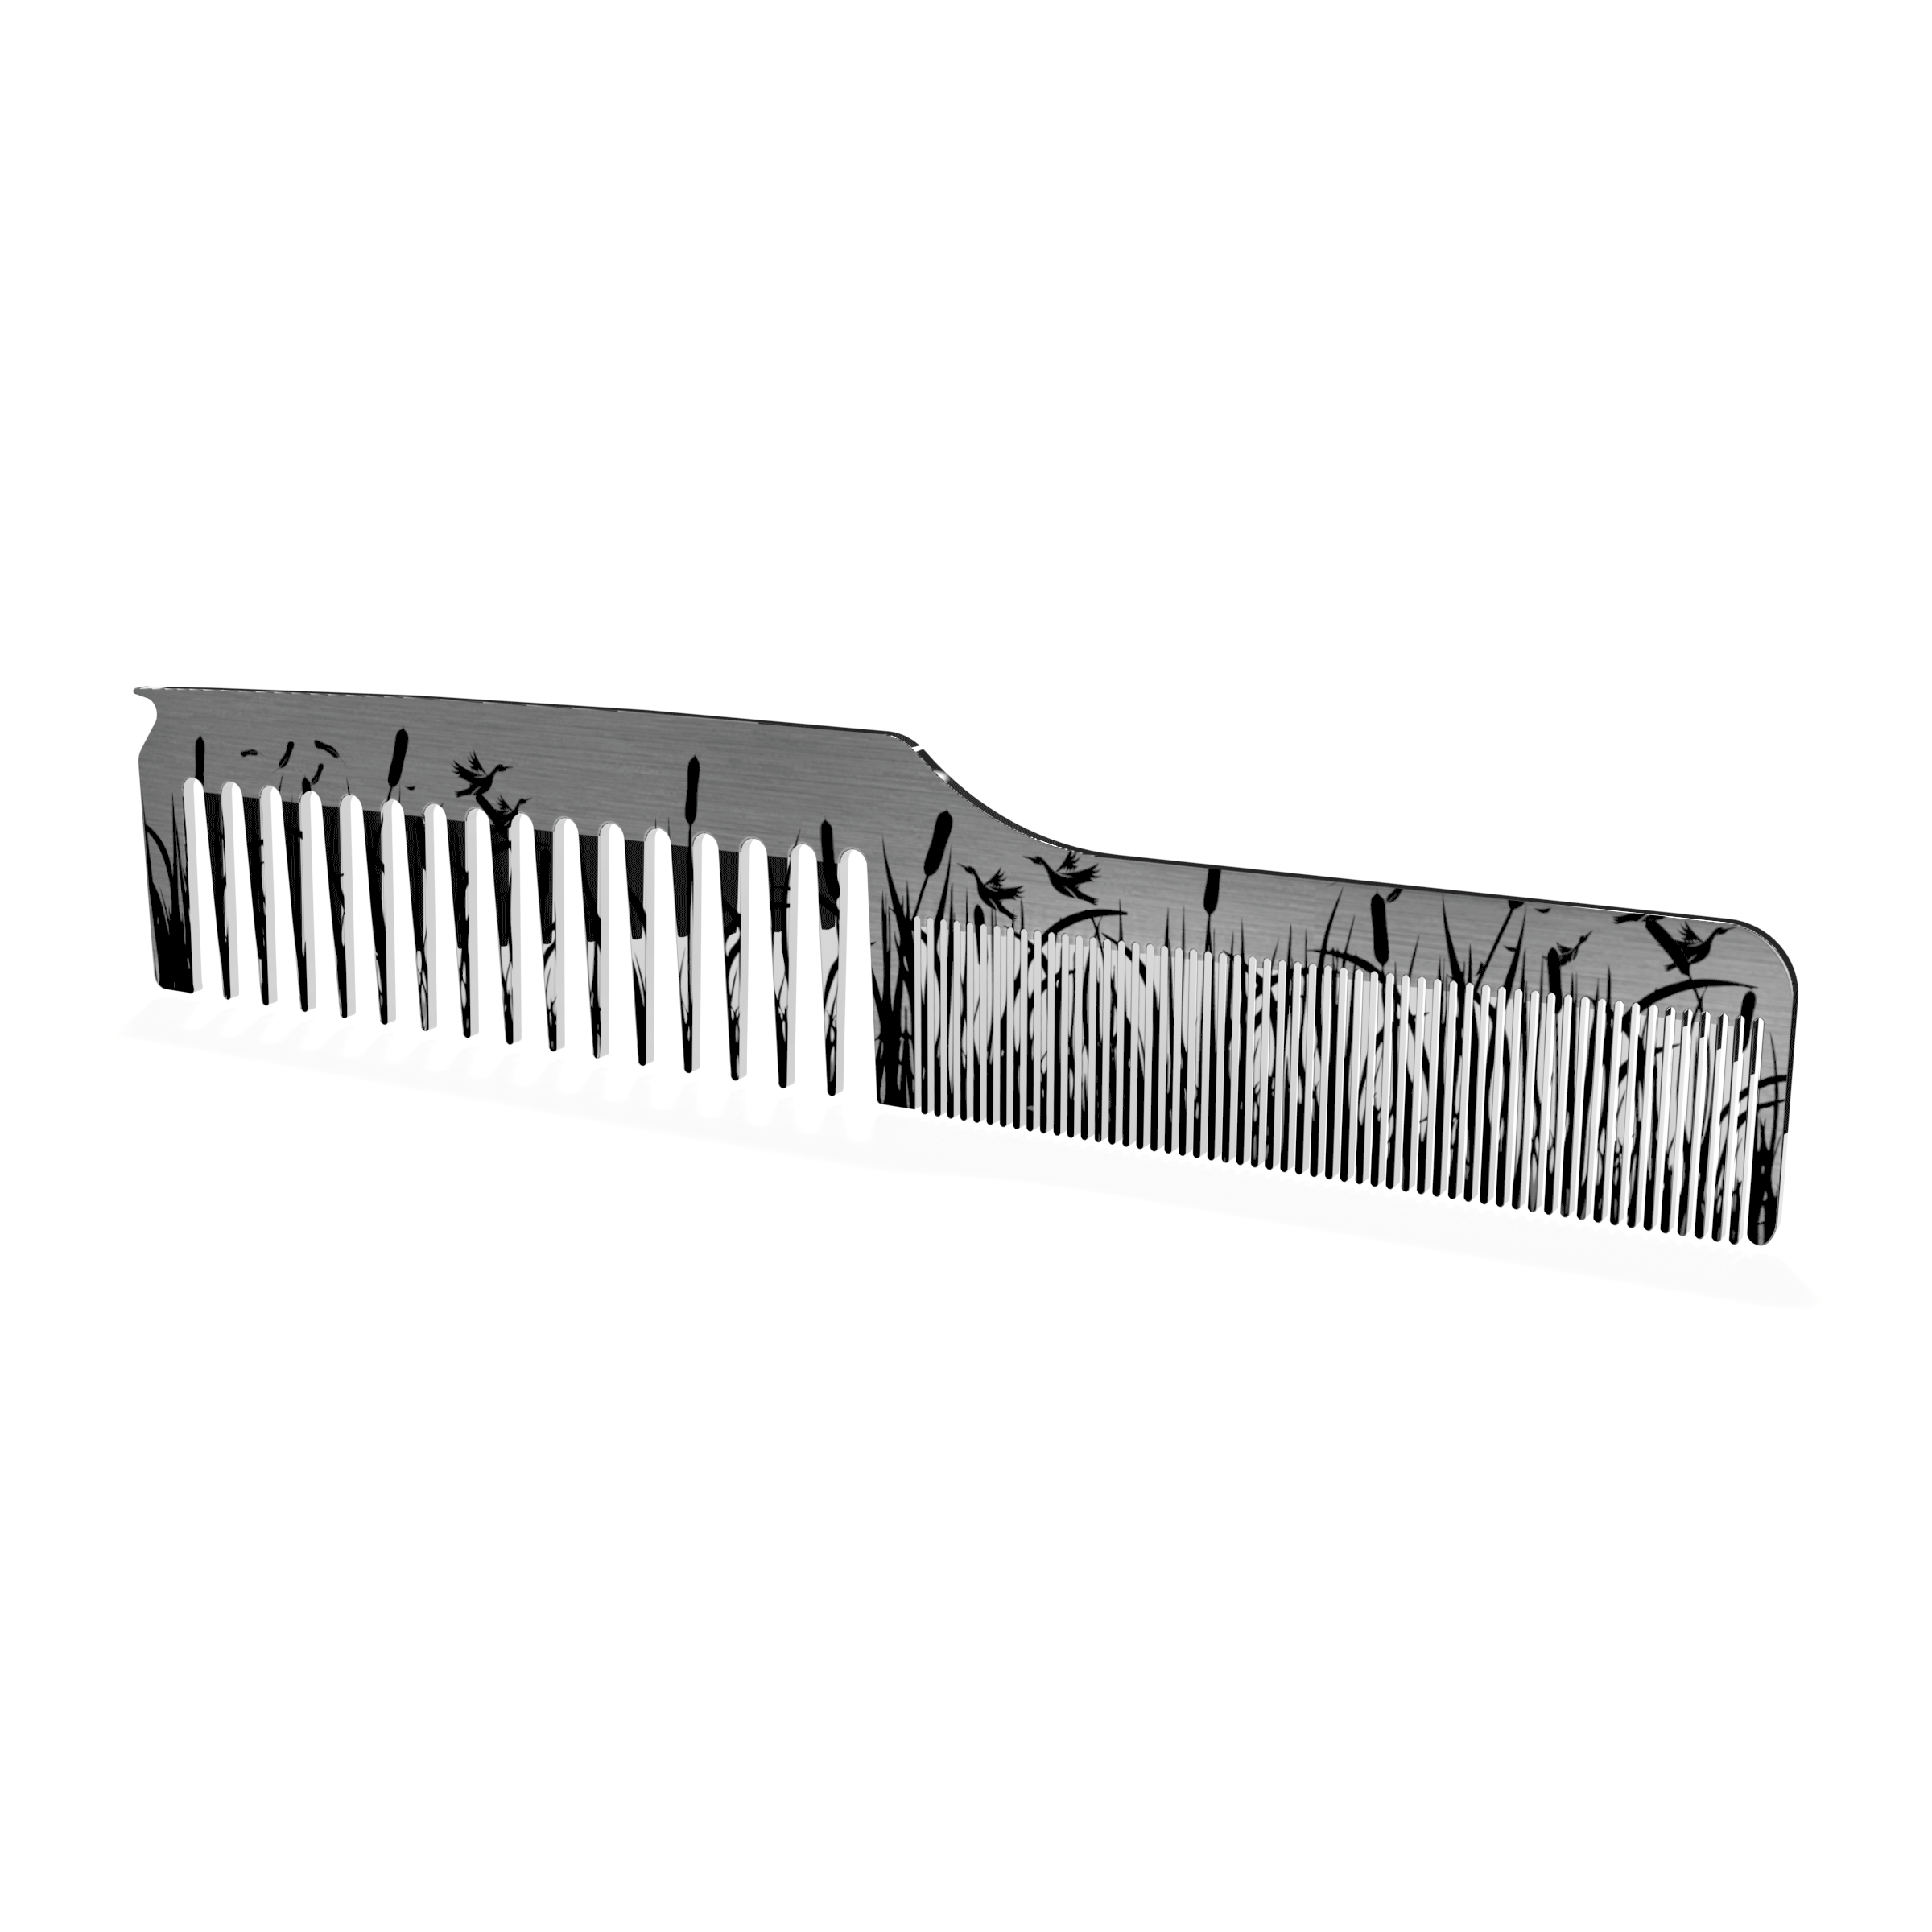 Duck Comb Hair Styling Hair Care